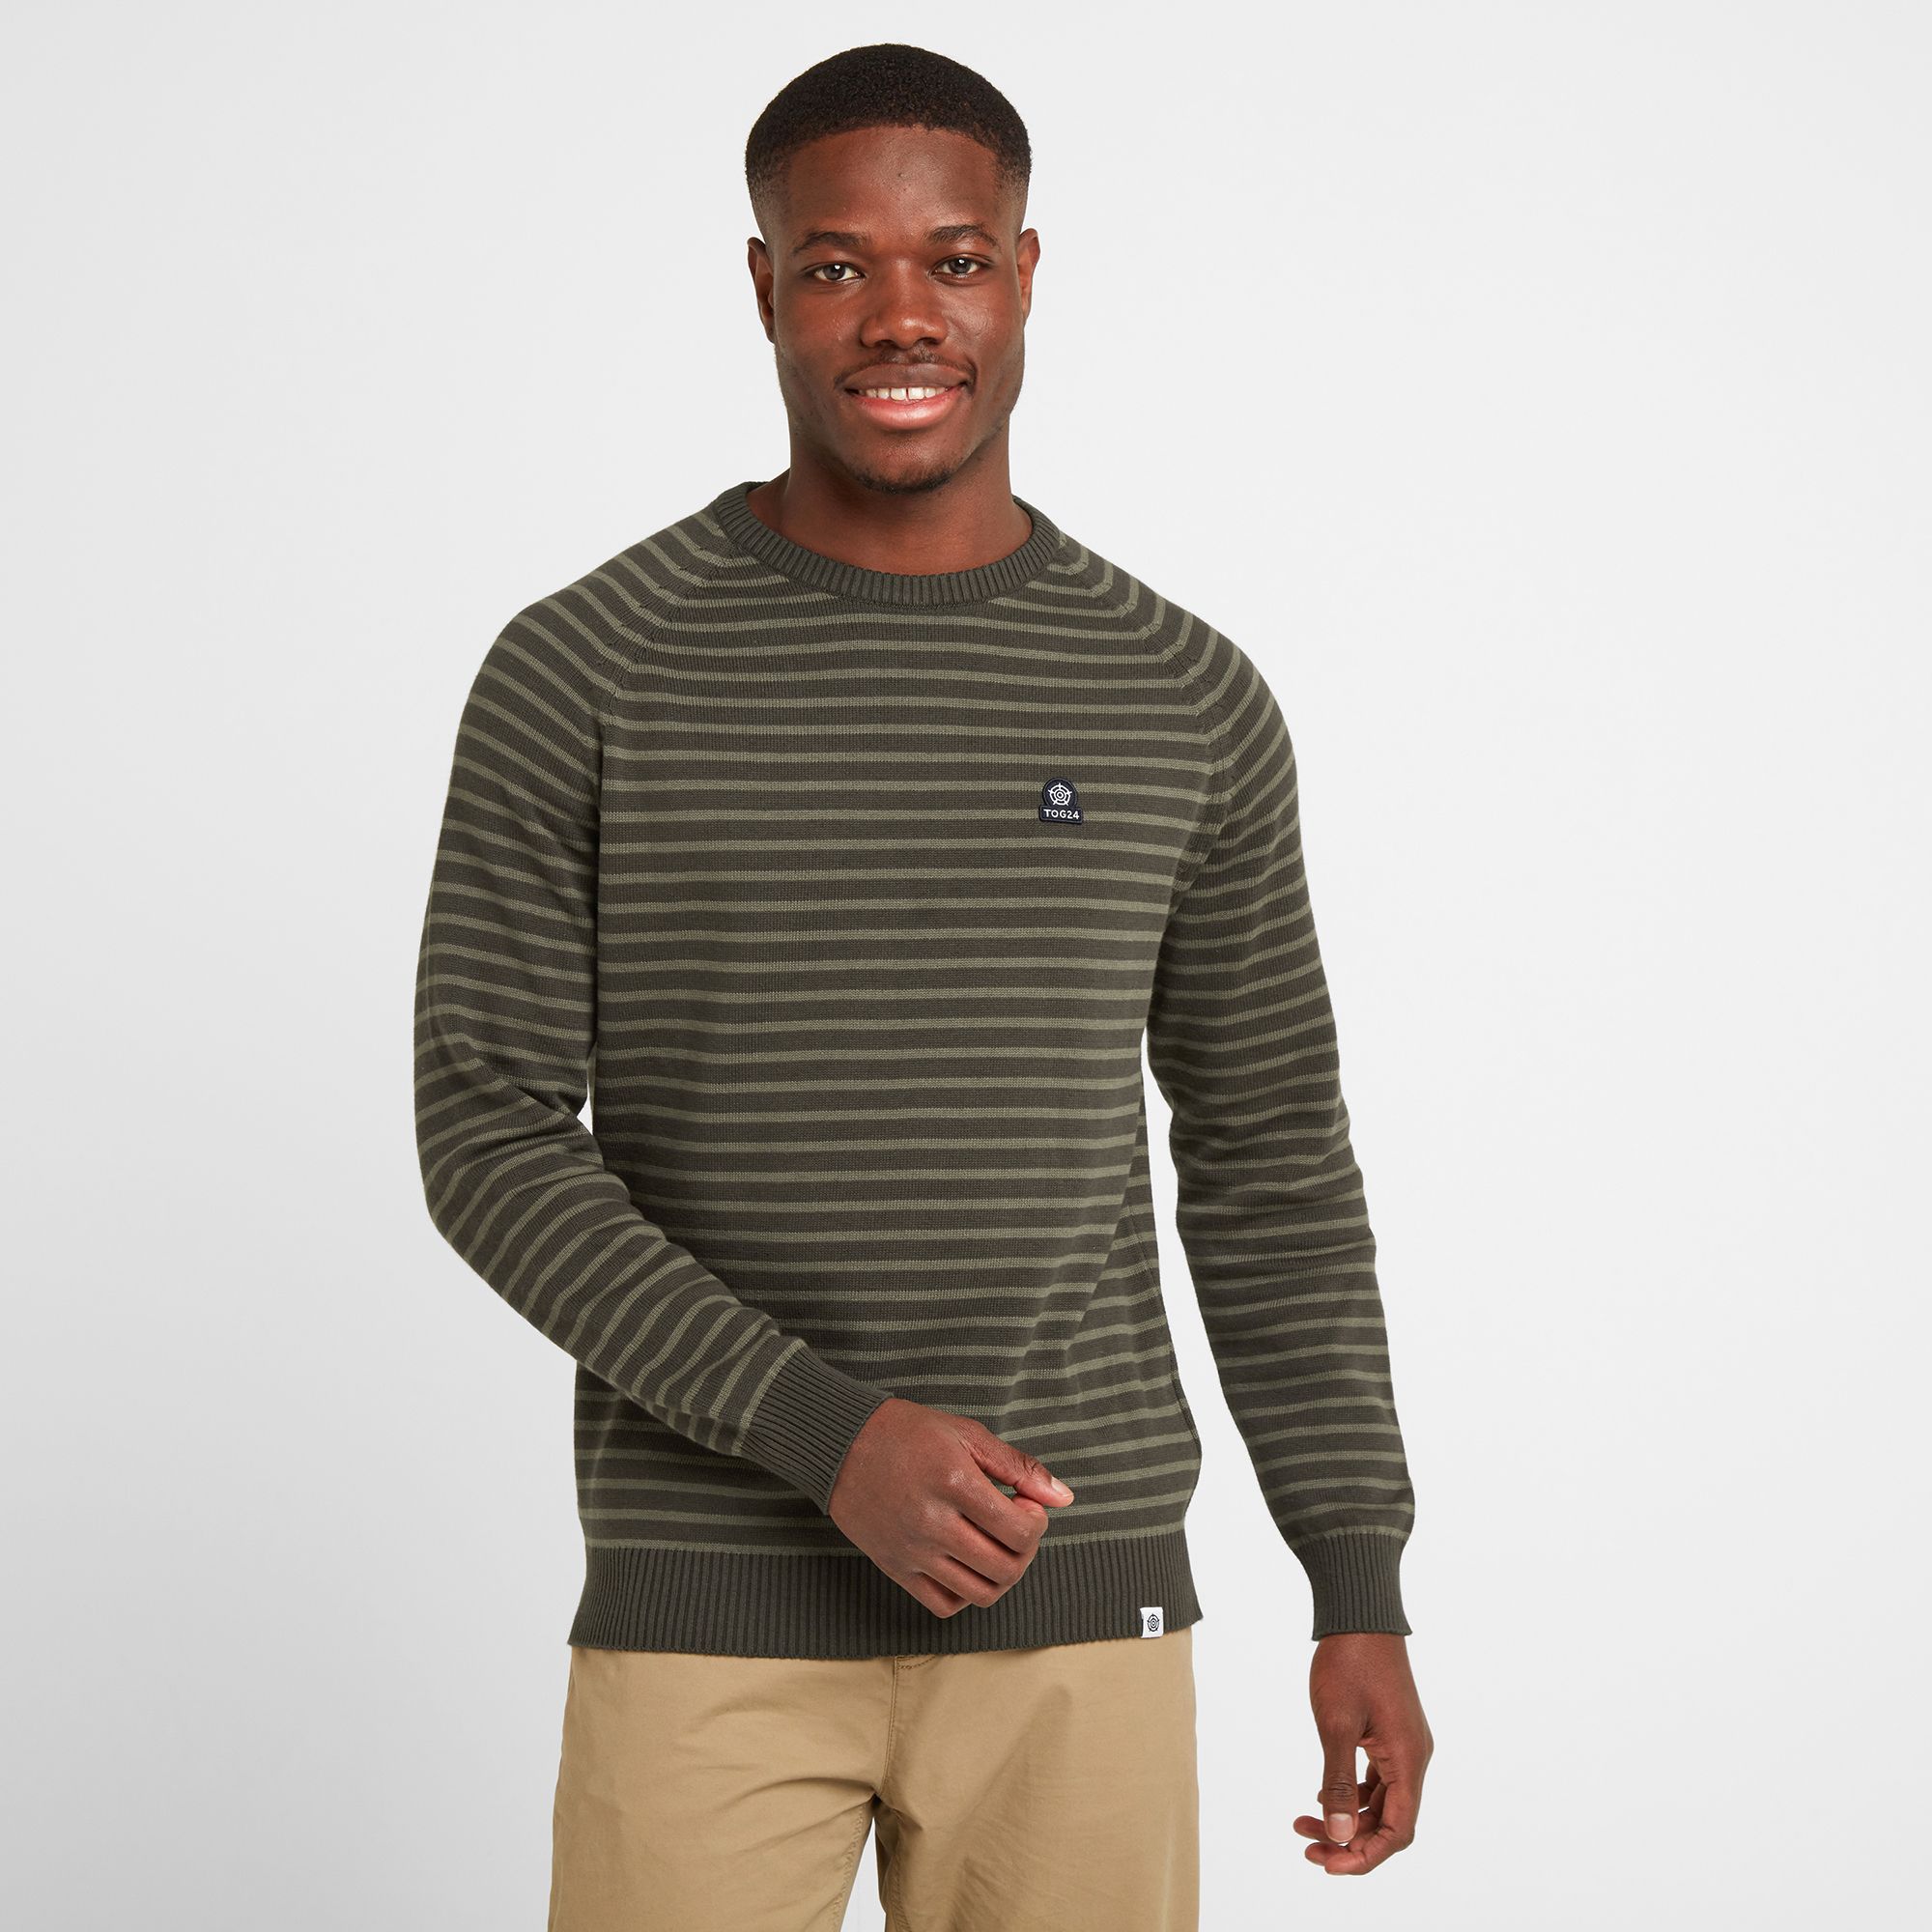 Perfect for a day at the coast, a walk across the moors or a night out with friends, our Willard supersoft cotton jumper feels as good on as it looks. Soft, lightweight, but hard wearing, this versatile sweater has relaxed fit sleeves, a ribbed crew neck, cuffs and hem and comes in classic Breton stripes that are yarn dyed, so they will stay true wash after wash.Designed in North Yorkshire, where you often need an extra layer in spring and summer, Willard is subtly branded with our signature Yorkshire Rose emblem featured in a woven label on the hem and an embroidered badge on the chest.